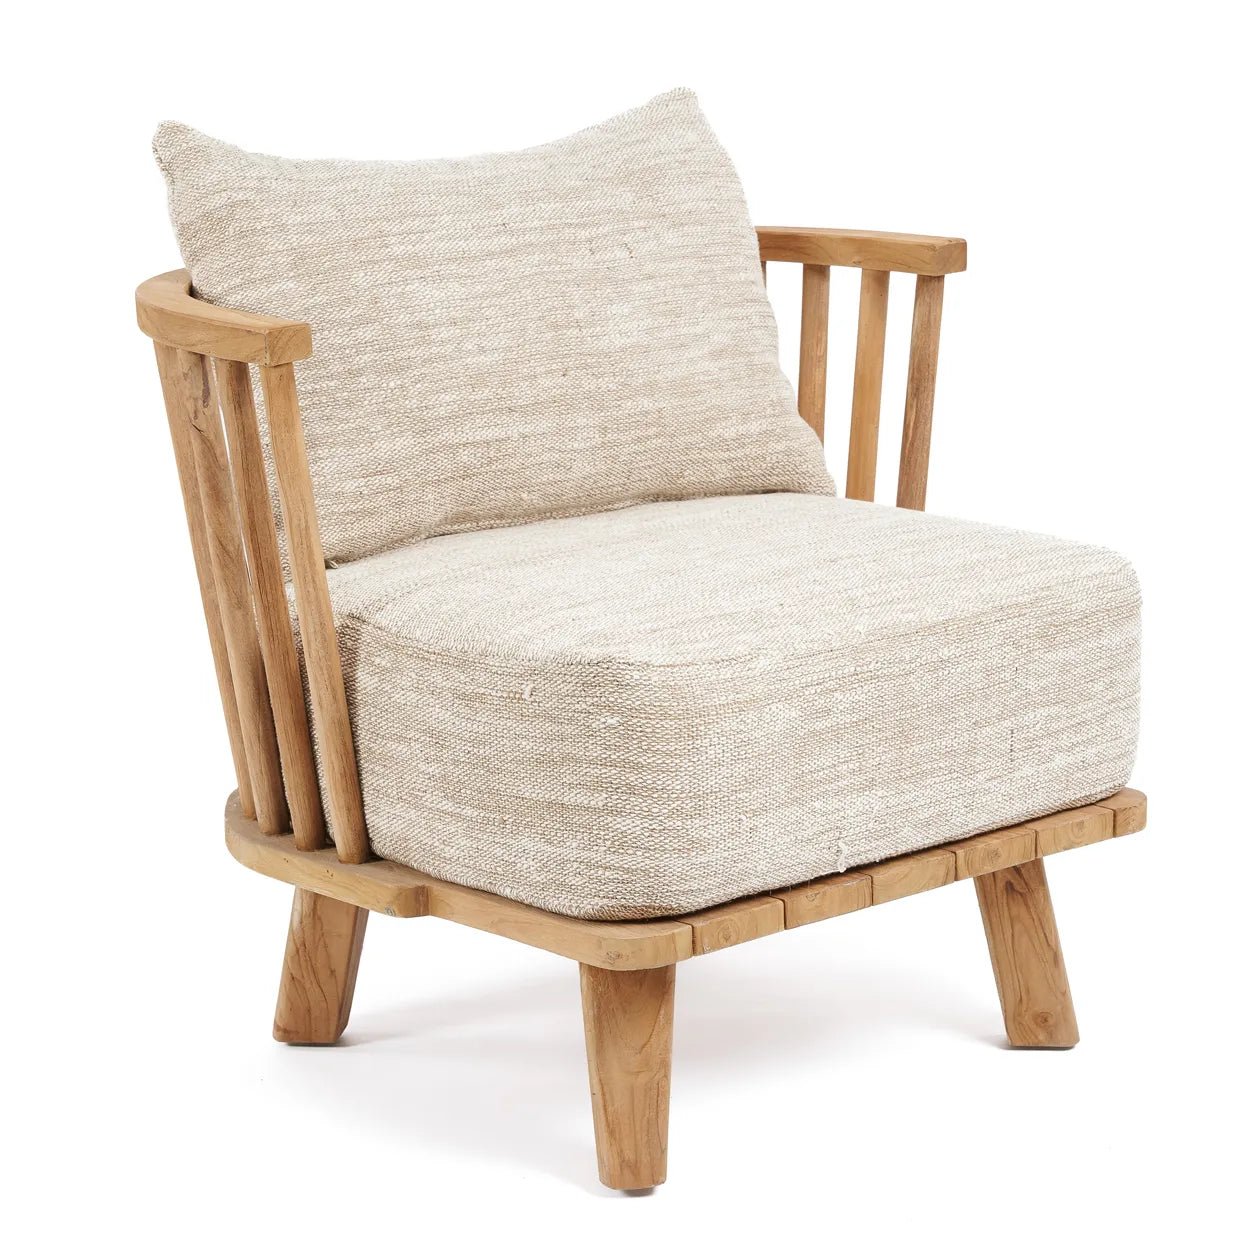 The Malawi One Seater - Natural Beige - FancyVintage.nl -